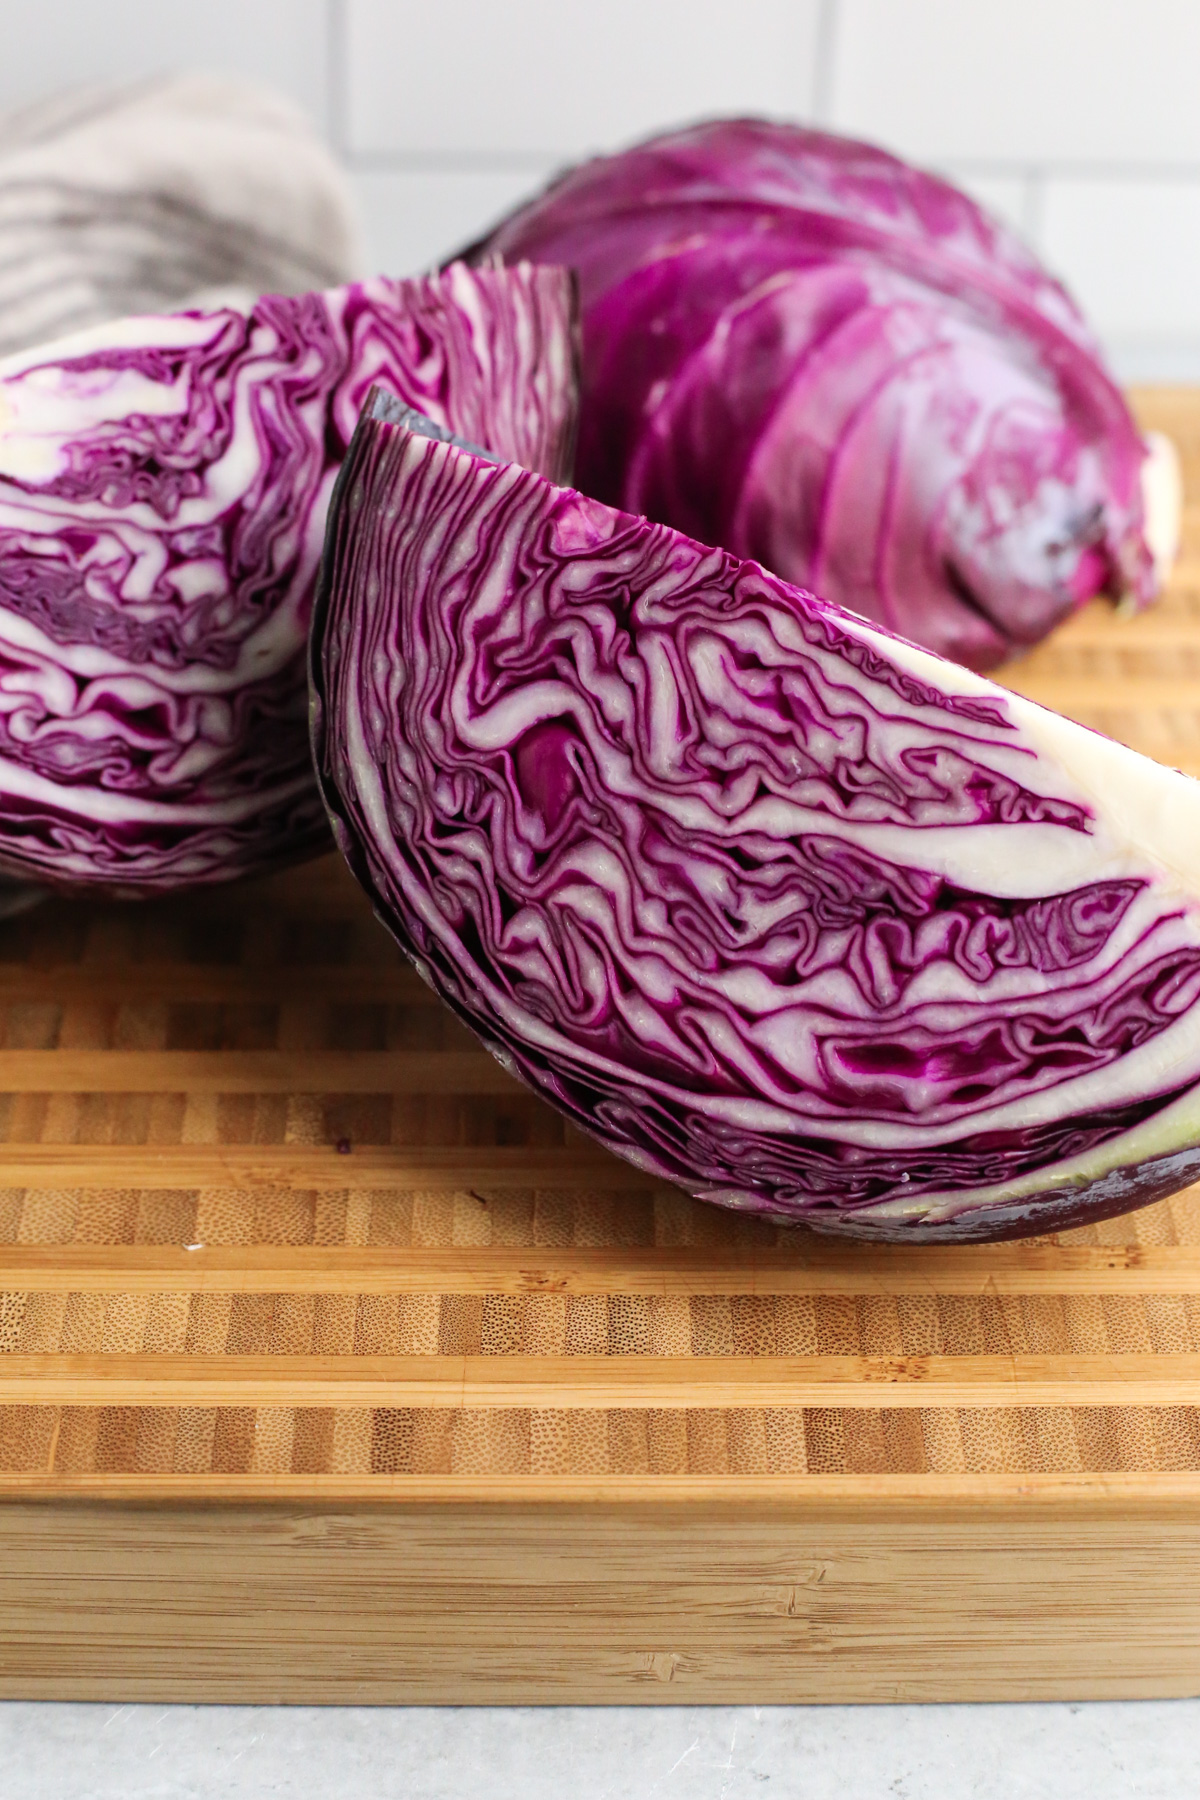 Several pieces of sliced red cabbage on a butcher block cutting board, revealing the densely packed, vibrantly colored leaves and white core